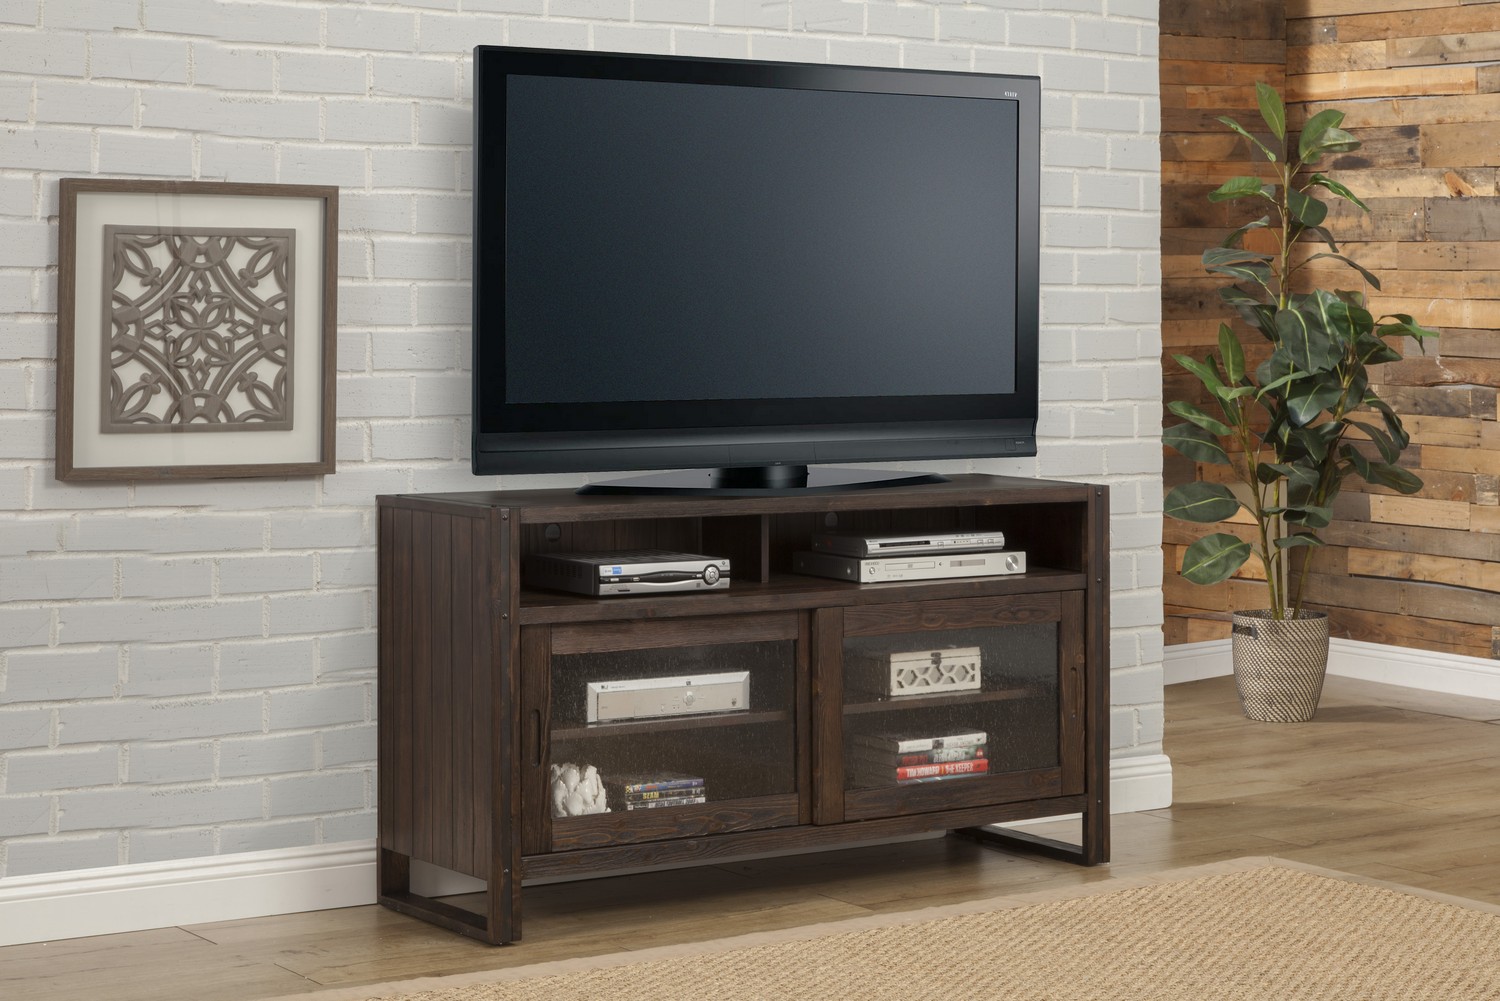 Parker House Brooklyn 60-inch TV Console - Antique Burnished Pine